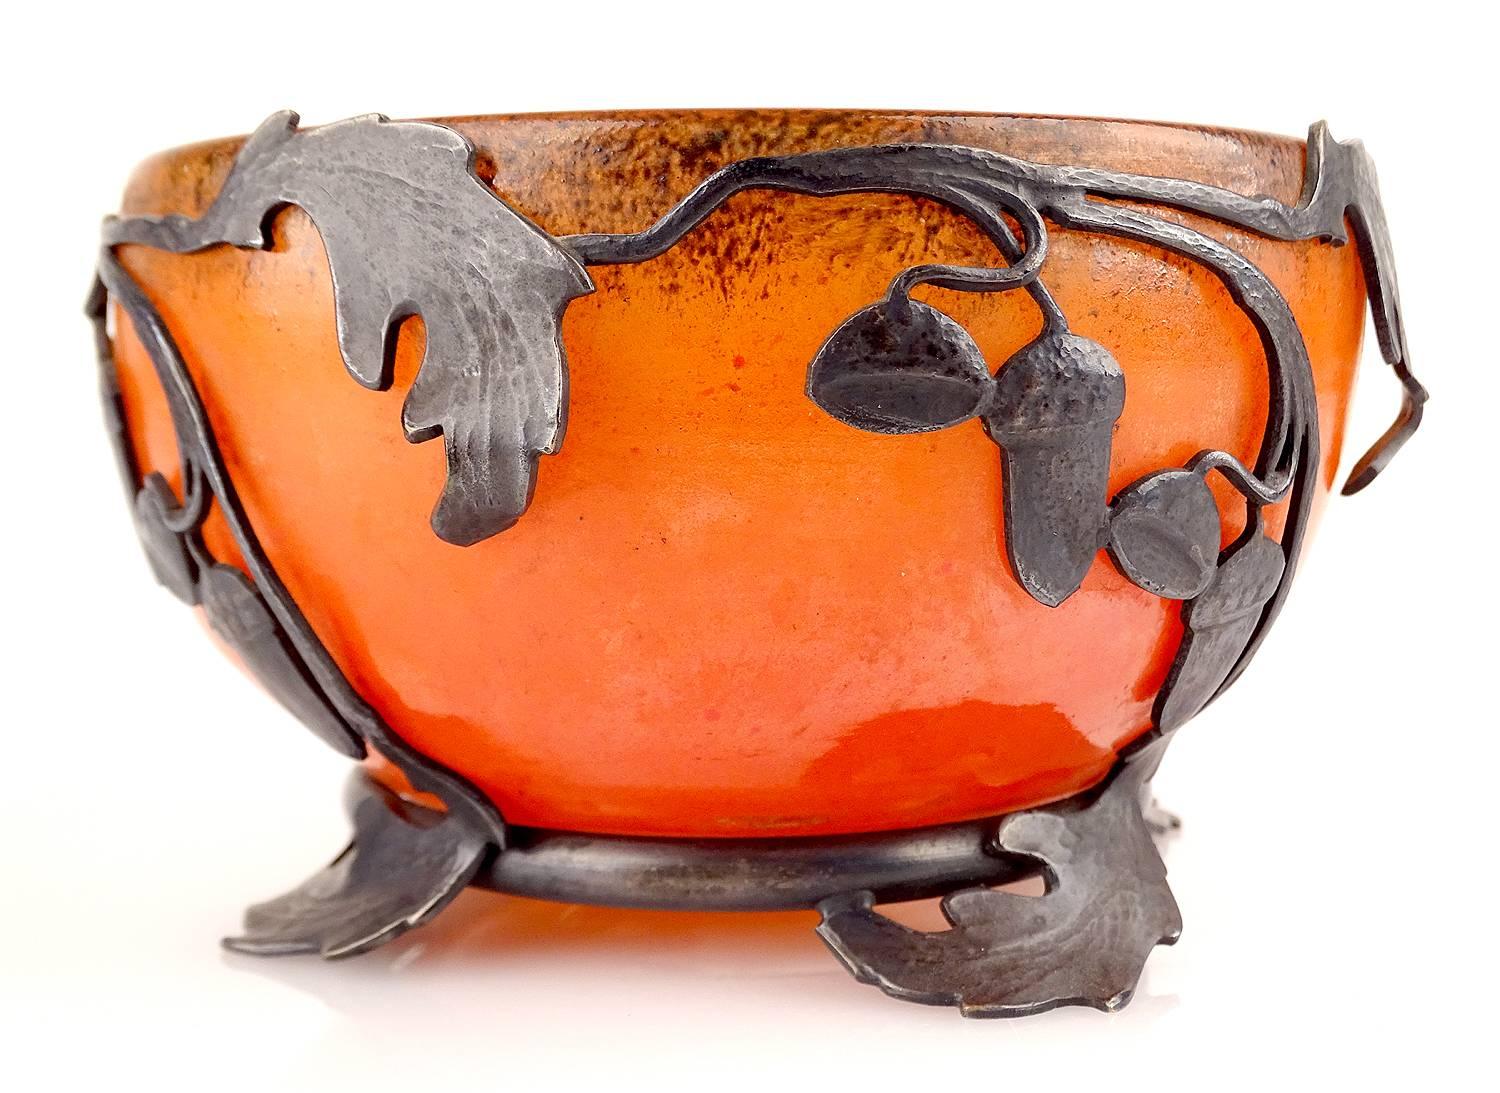 Early French Art Nouveau (circa 1890) glass bowl (clear blown glass with applied orange enamel) on wrought iron base by VAL Paris and Daum, France, circa 1910.

Art Nouveau is French for new art. The term was originally used in various articles